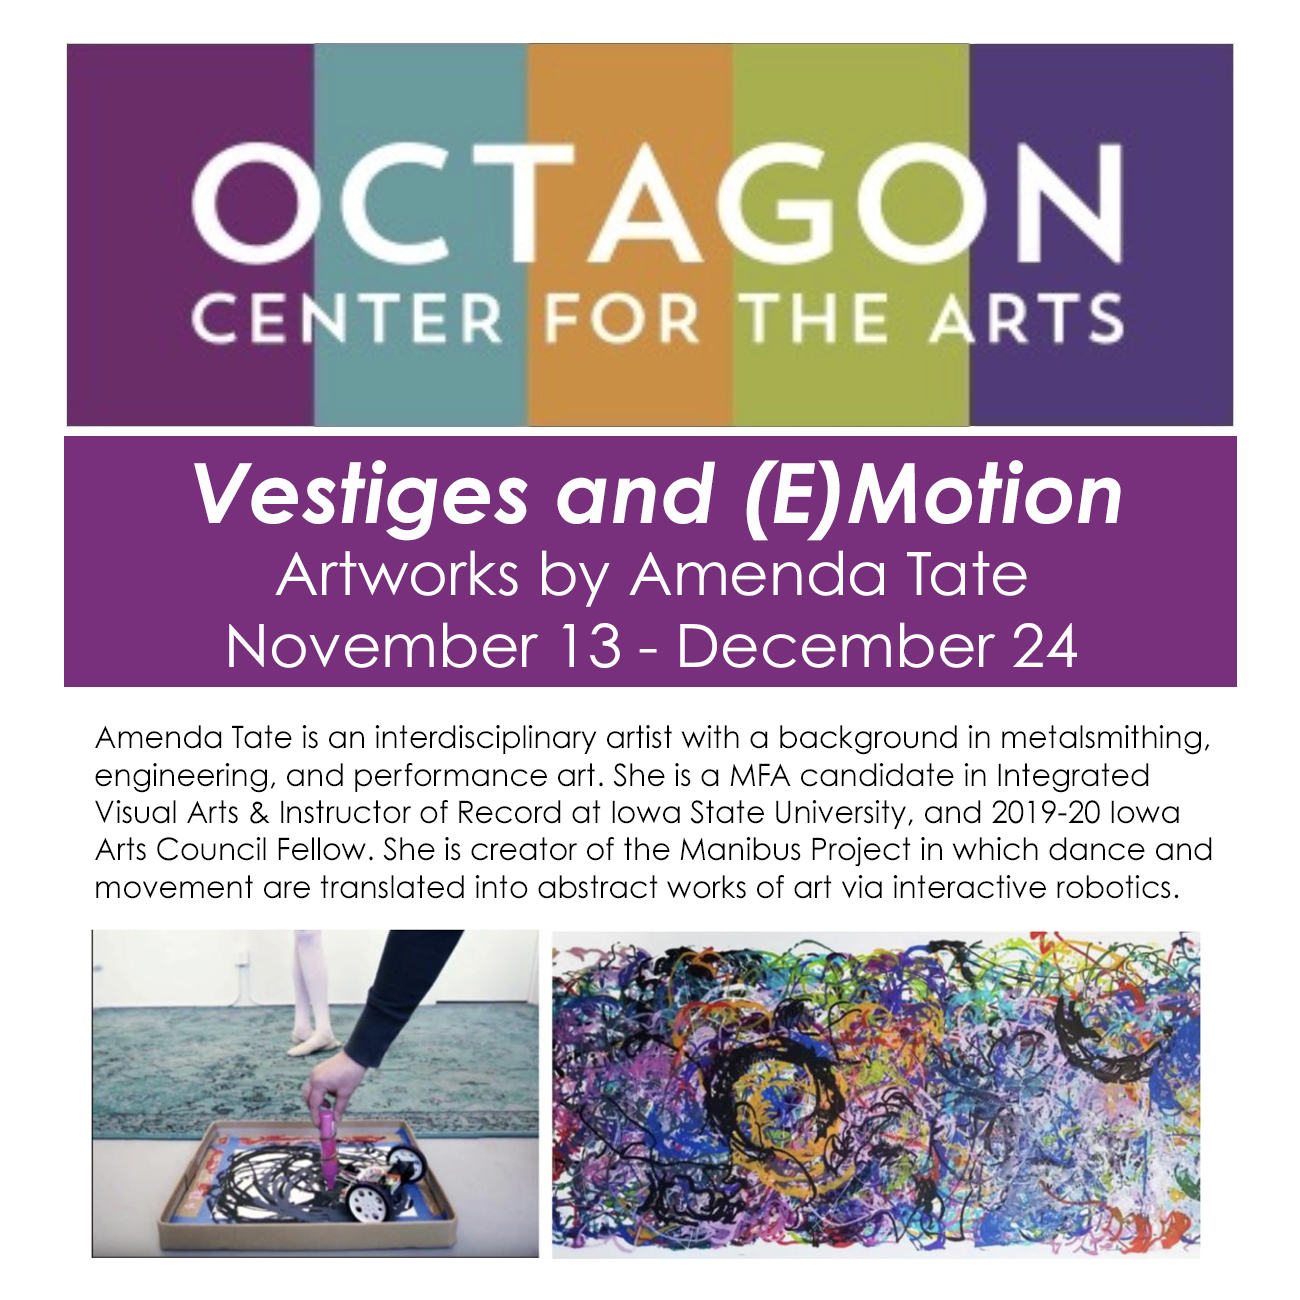 "Vestiges and (E)Motion" exhibit by Amenda Tate